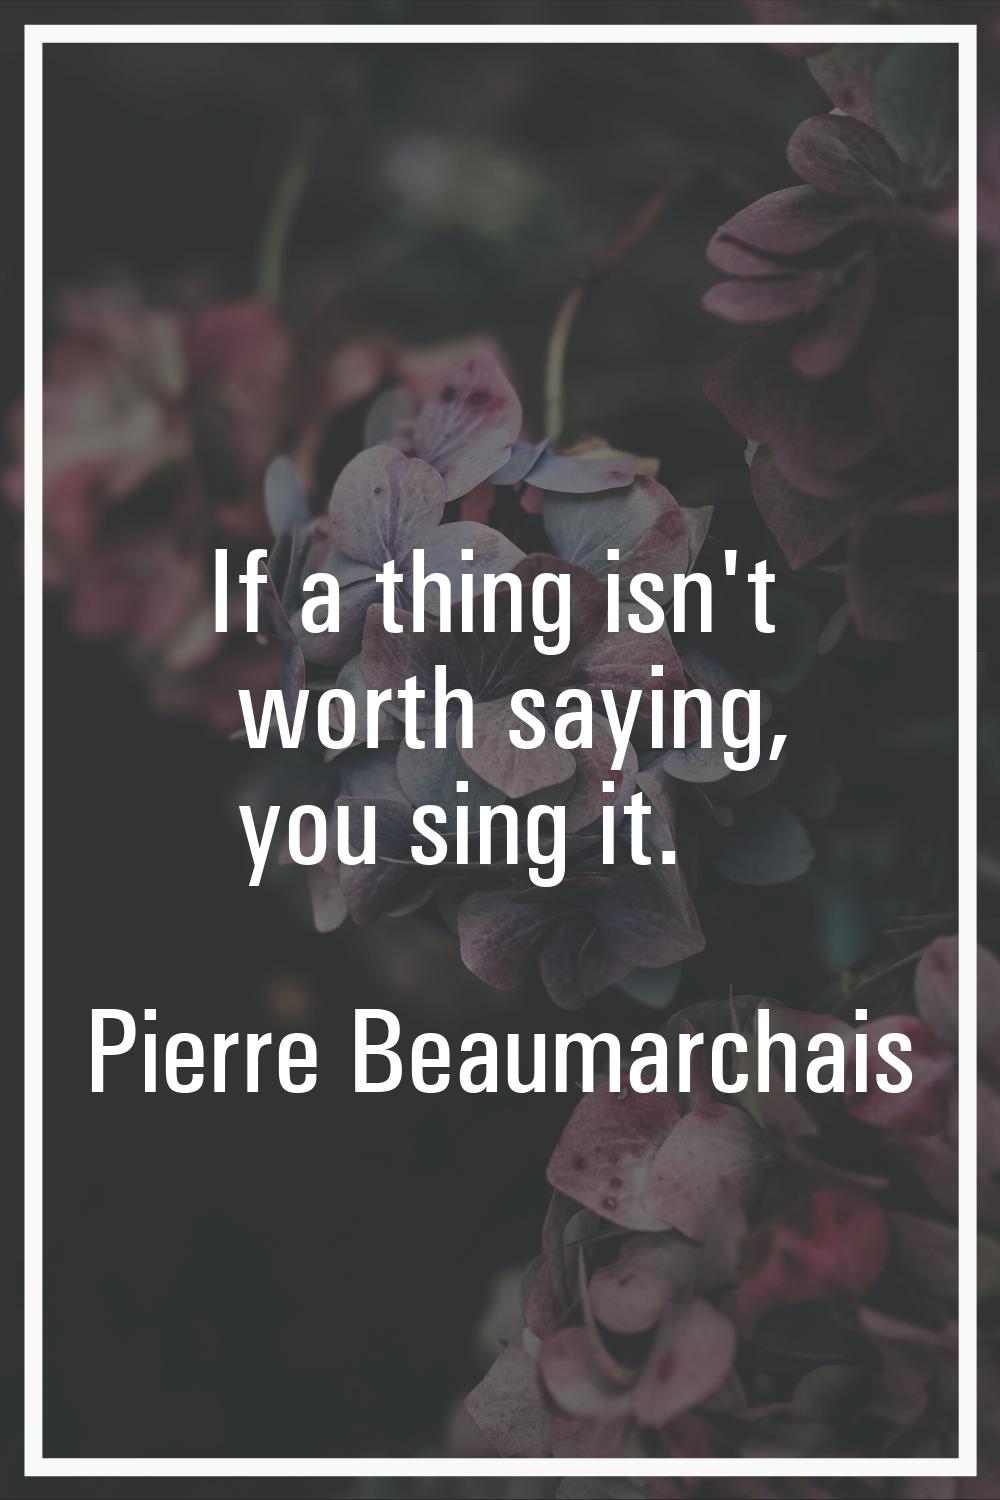 If a thing isn't worth saying, you sing it.